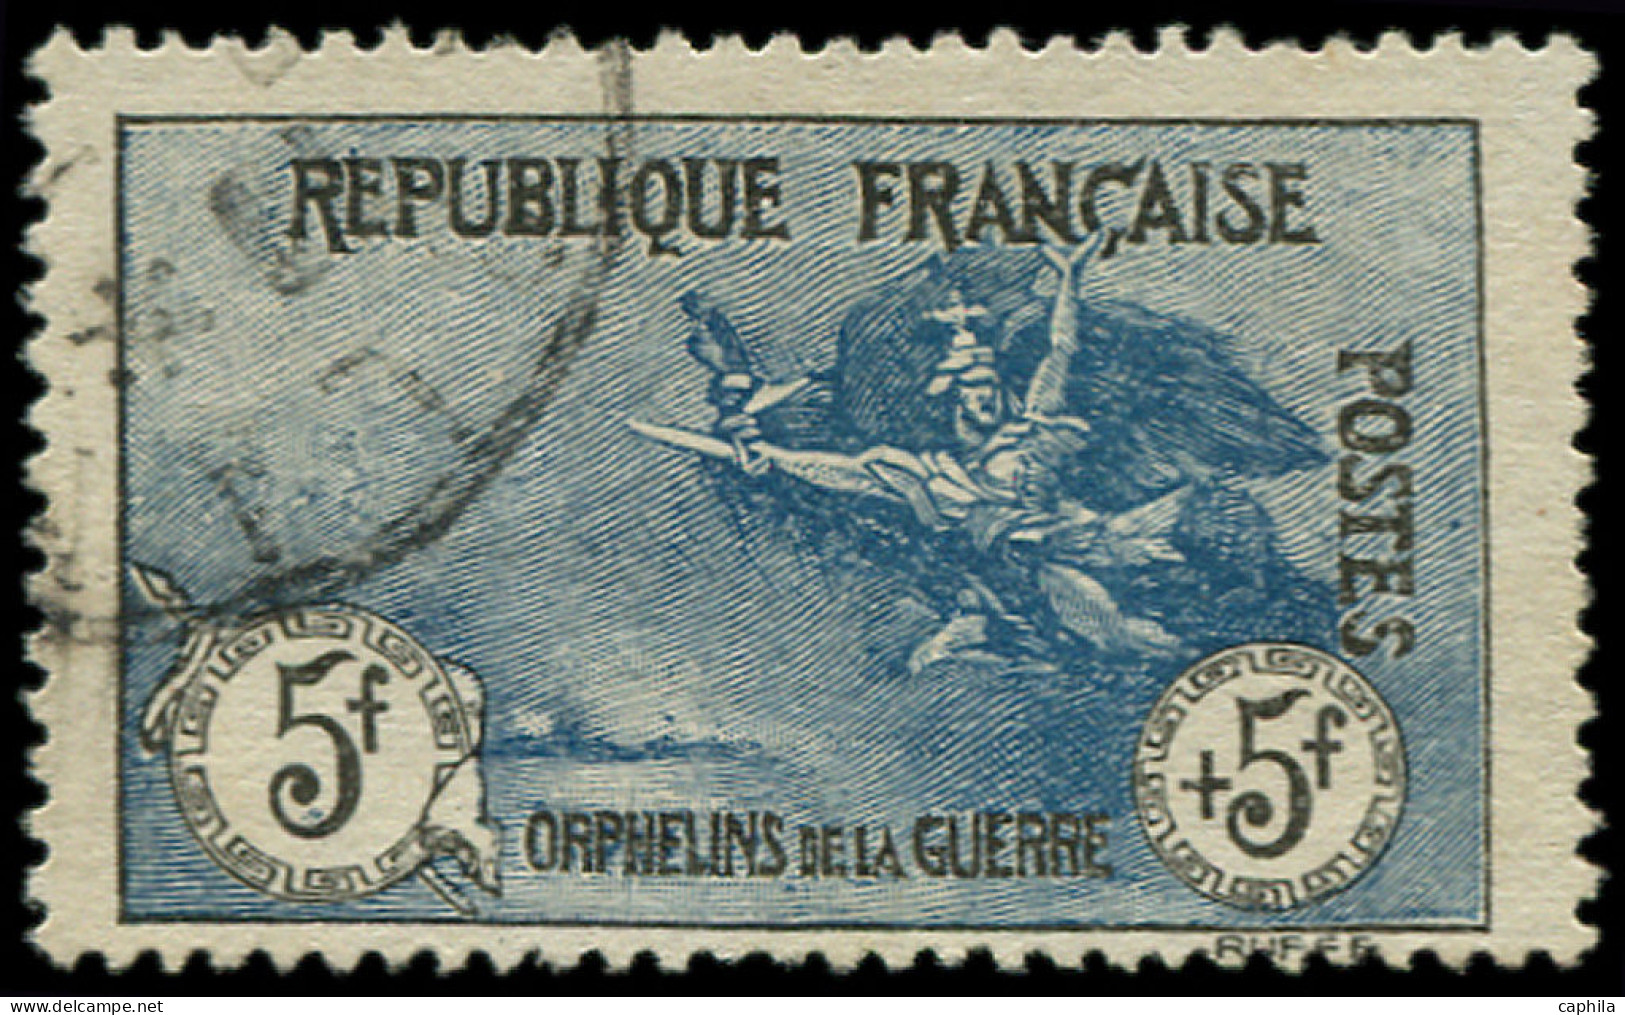 O FRANCE - Poste - 155, Bel Exemplaire: 5f. + 5f. Orphelins - Gebraucht